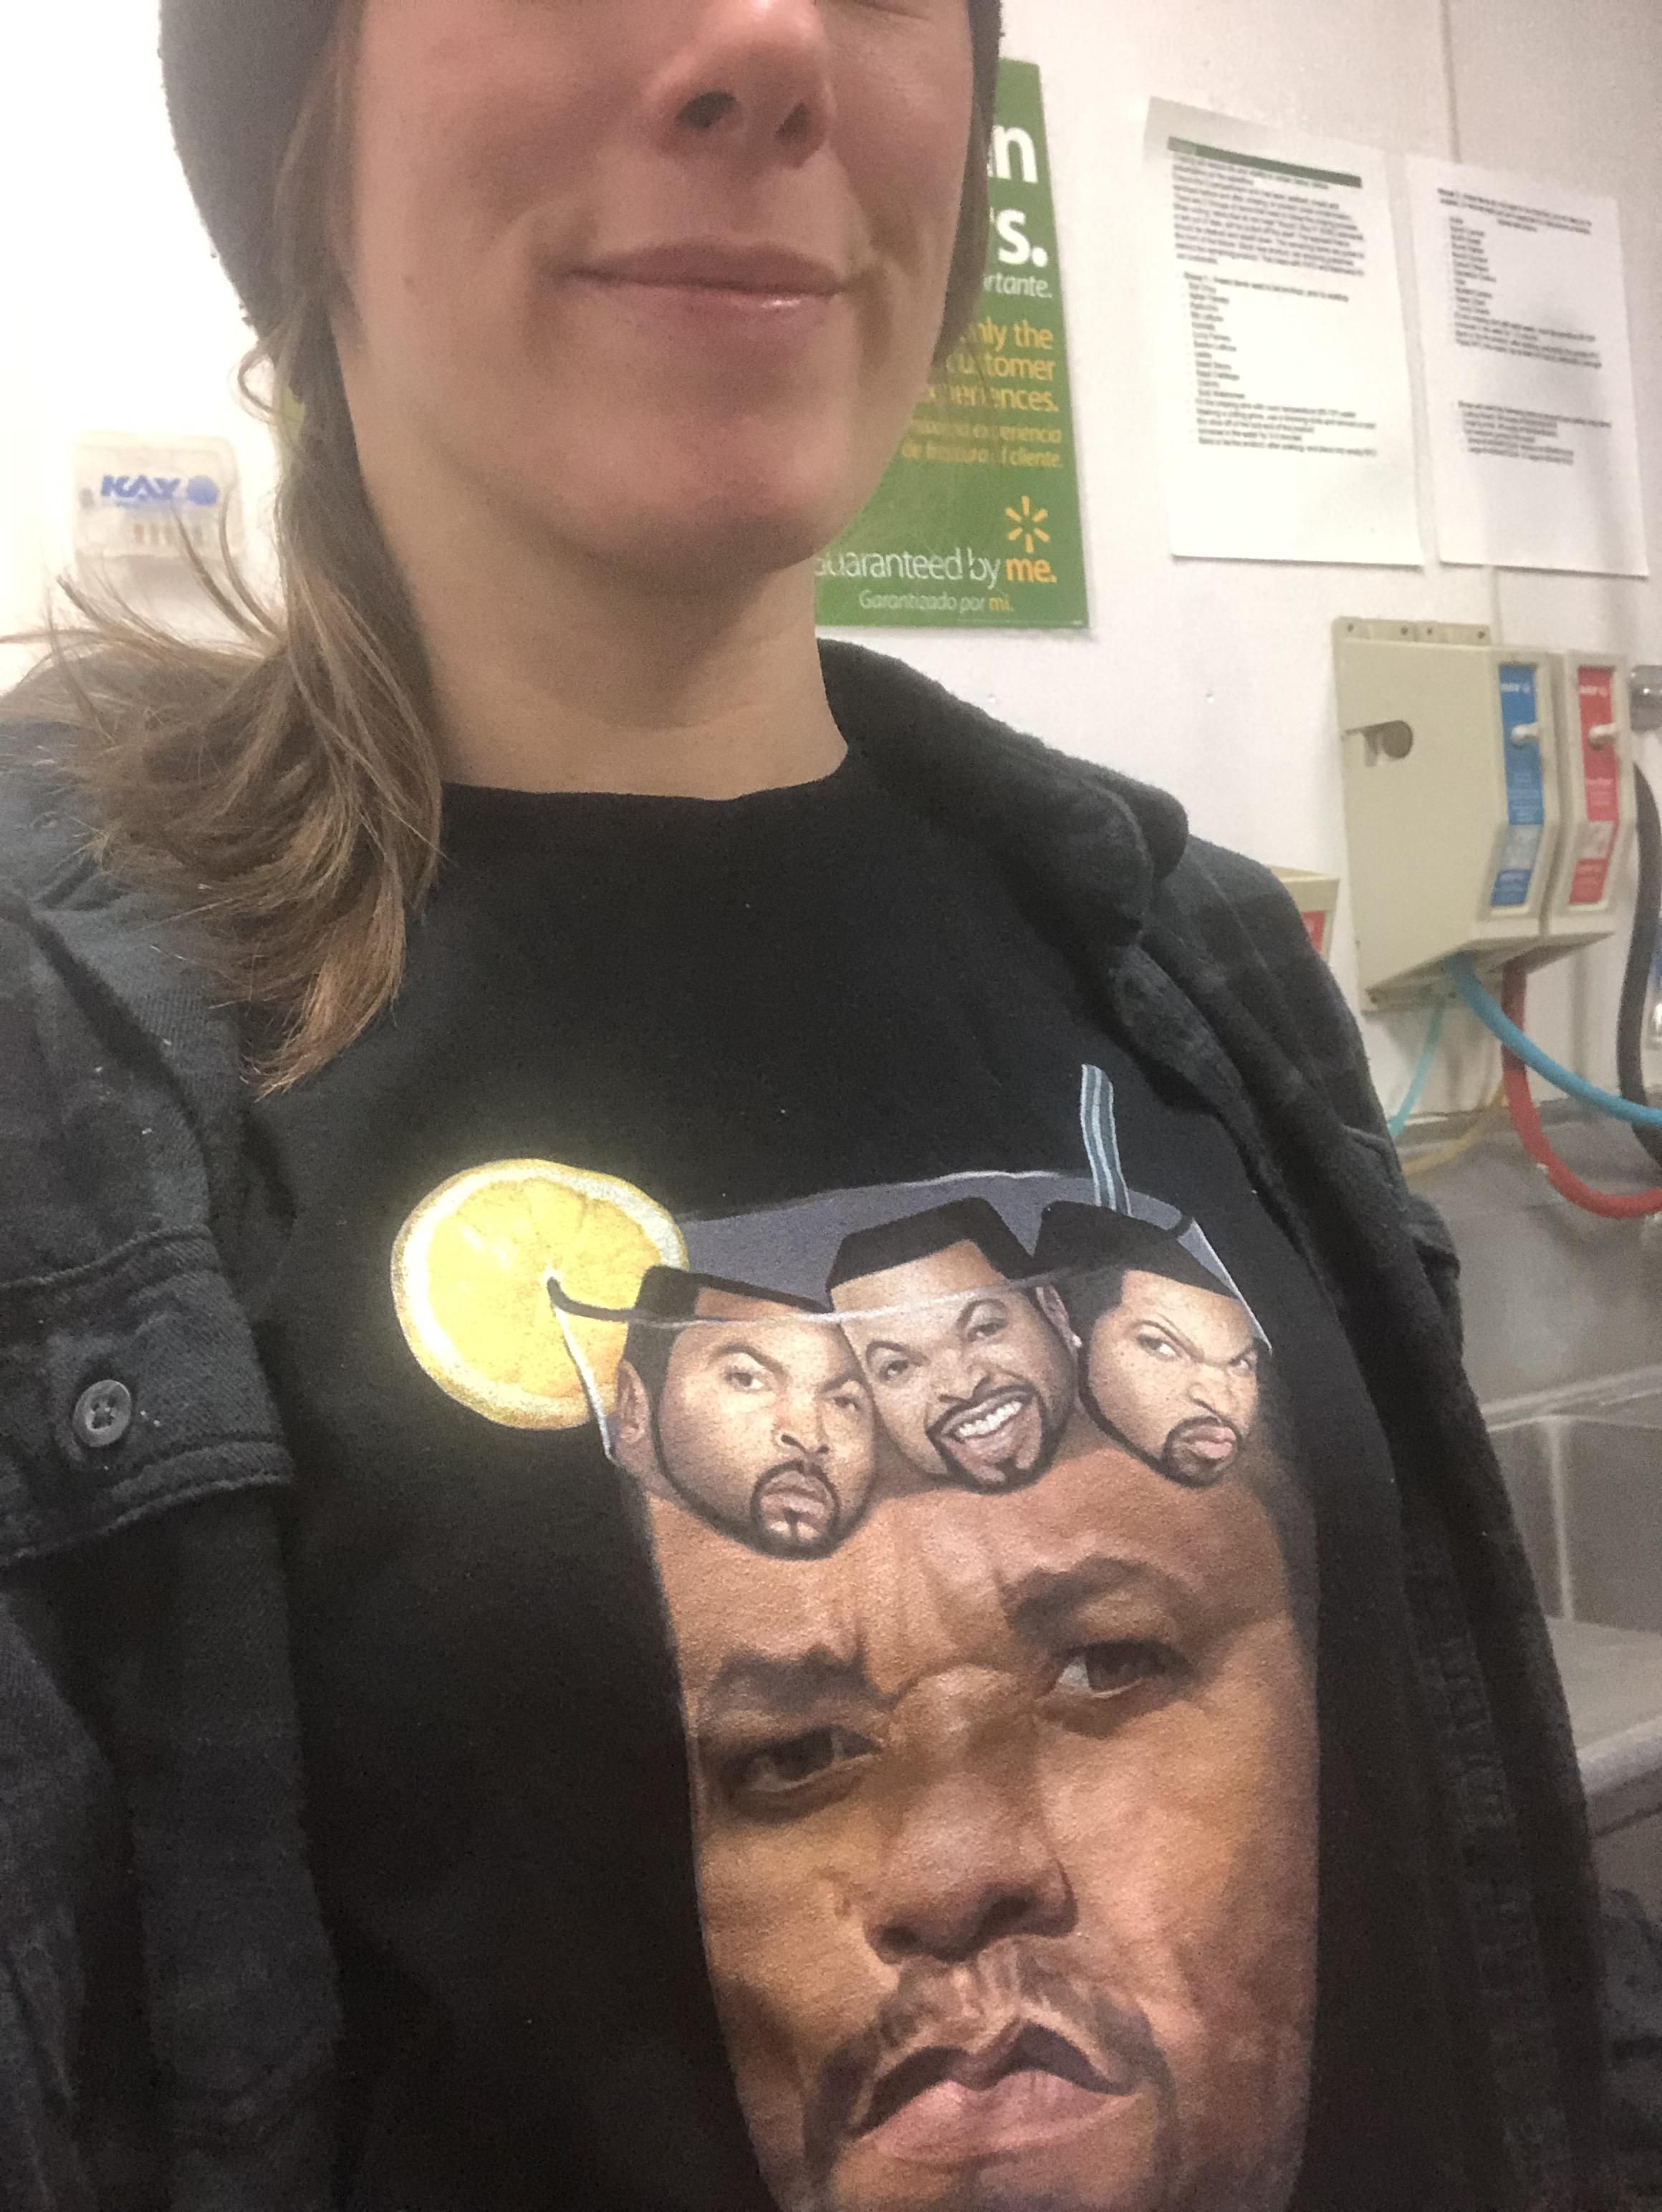 My shirt is a hit at work today